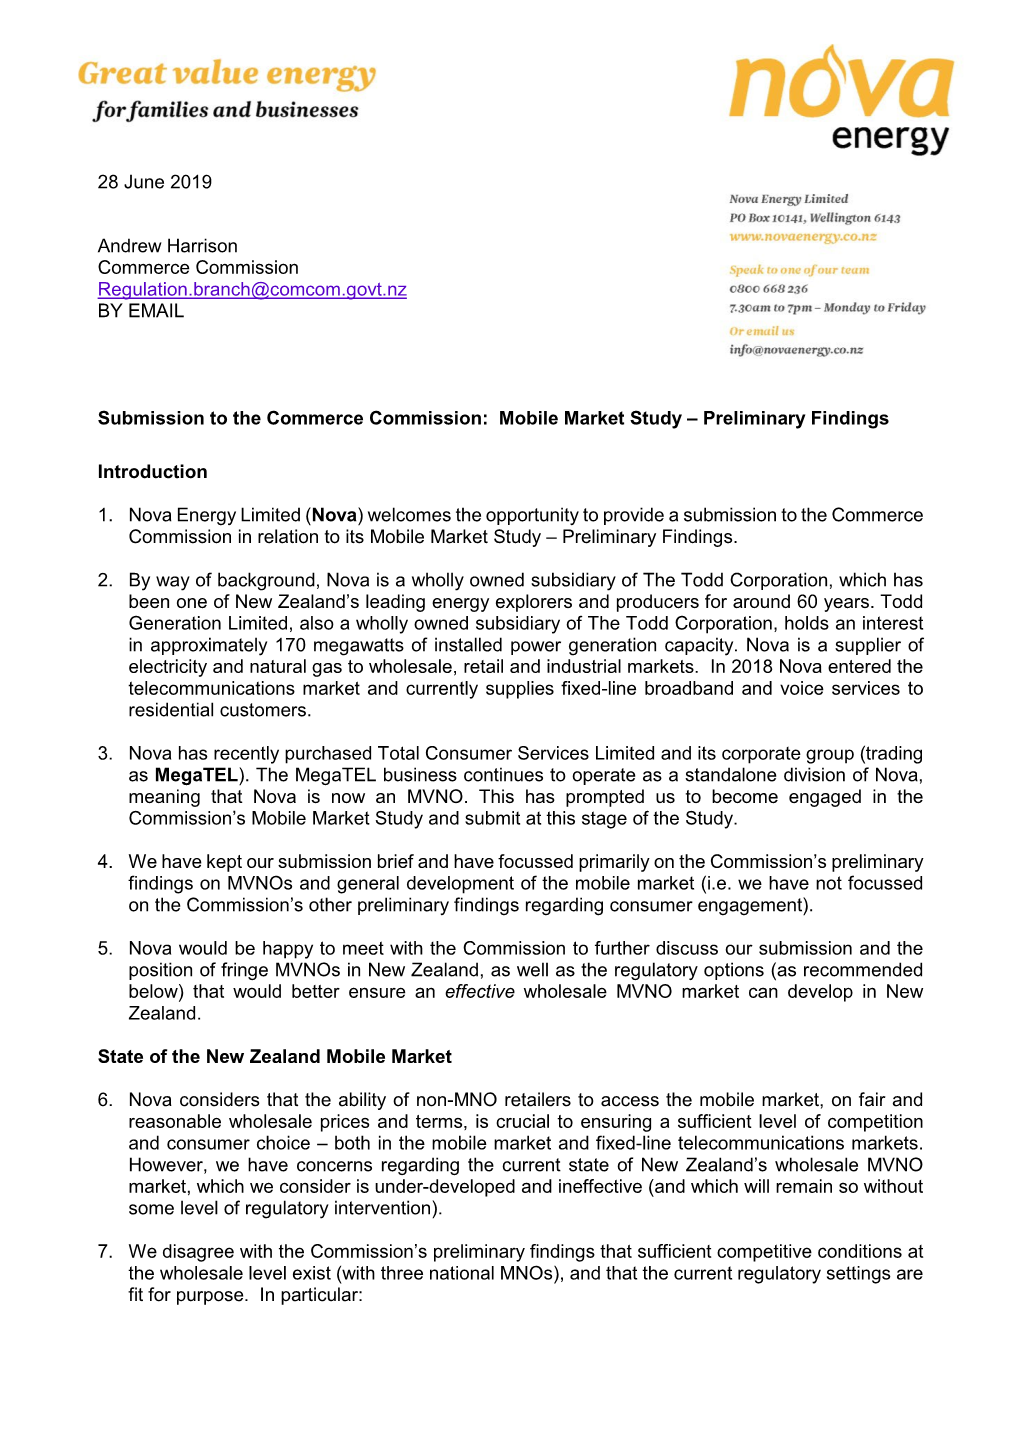 Nova Energy Limited (Nova) Welcomes the Opportunity to Provide a Submission to the Commerce Commission in Relation to Its Mobile Market Study – Preliminary Findings